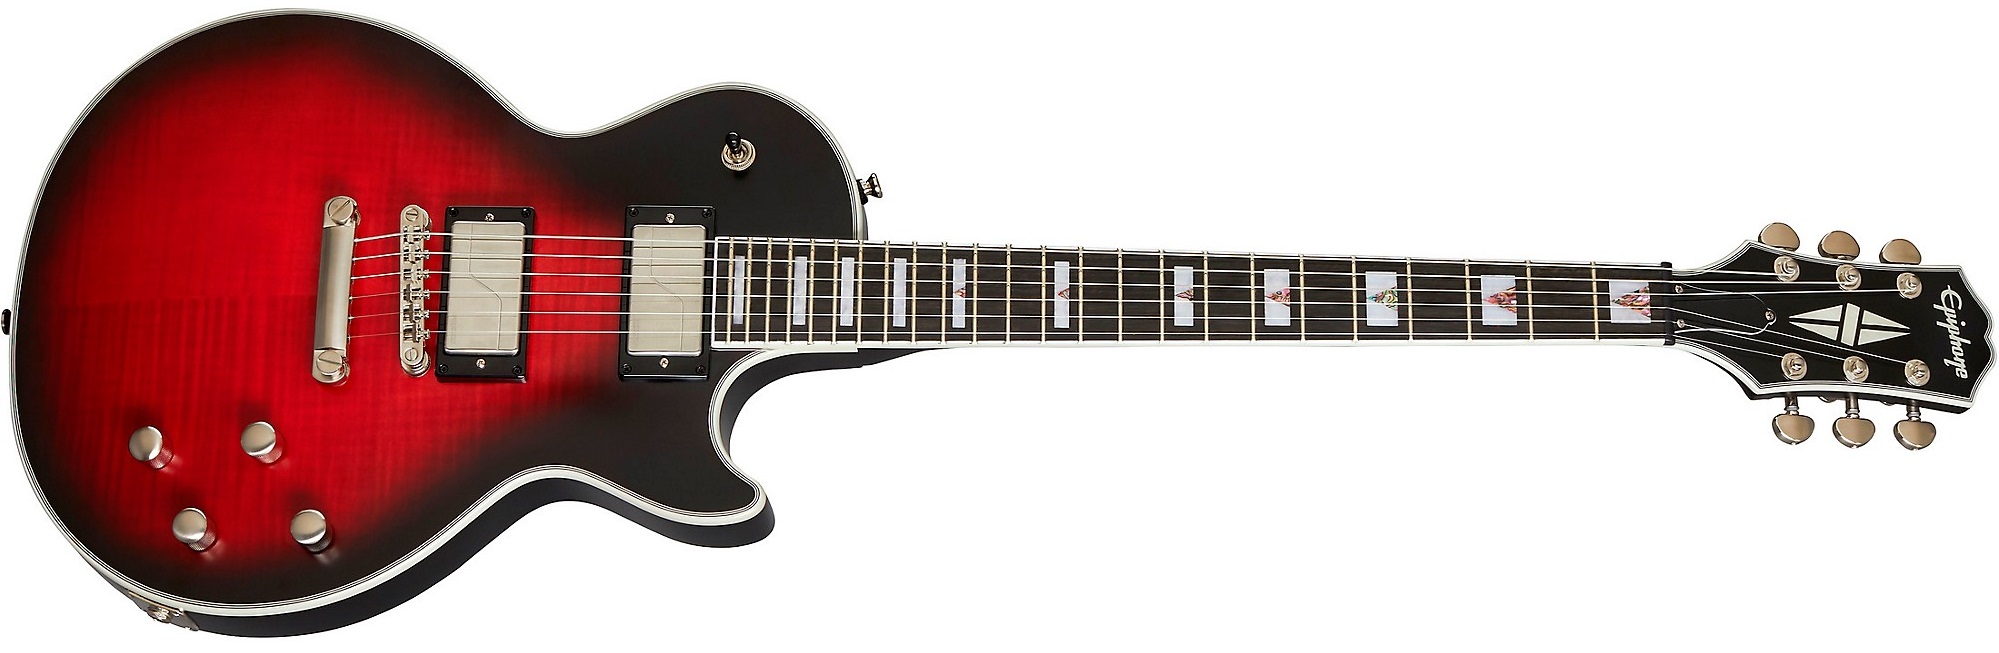 Epiphone Les Paul Prophecy Electric Guitar on a white background